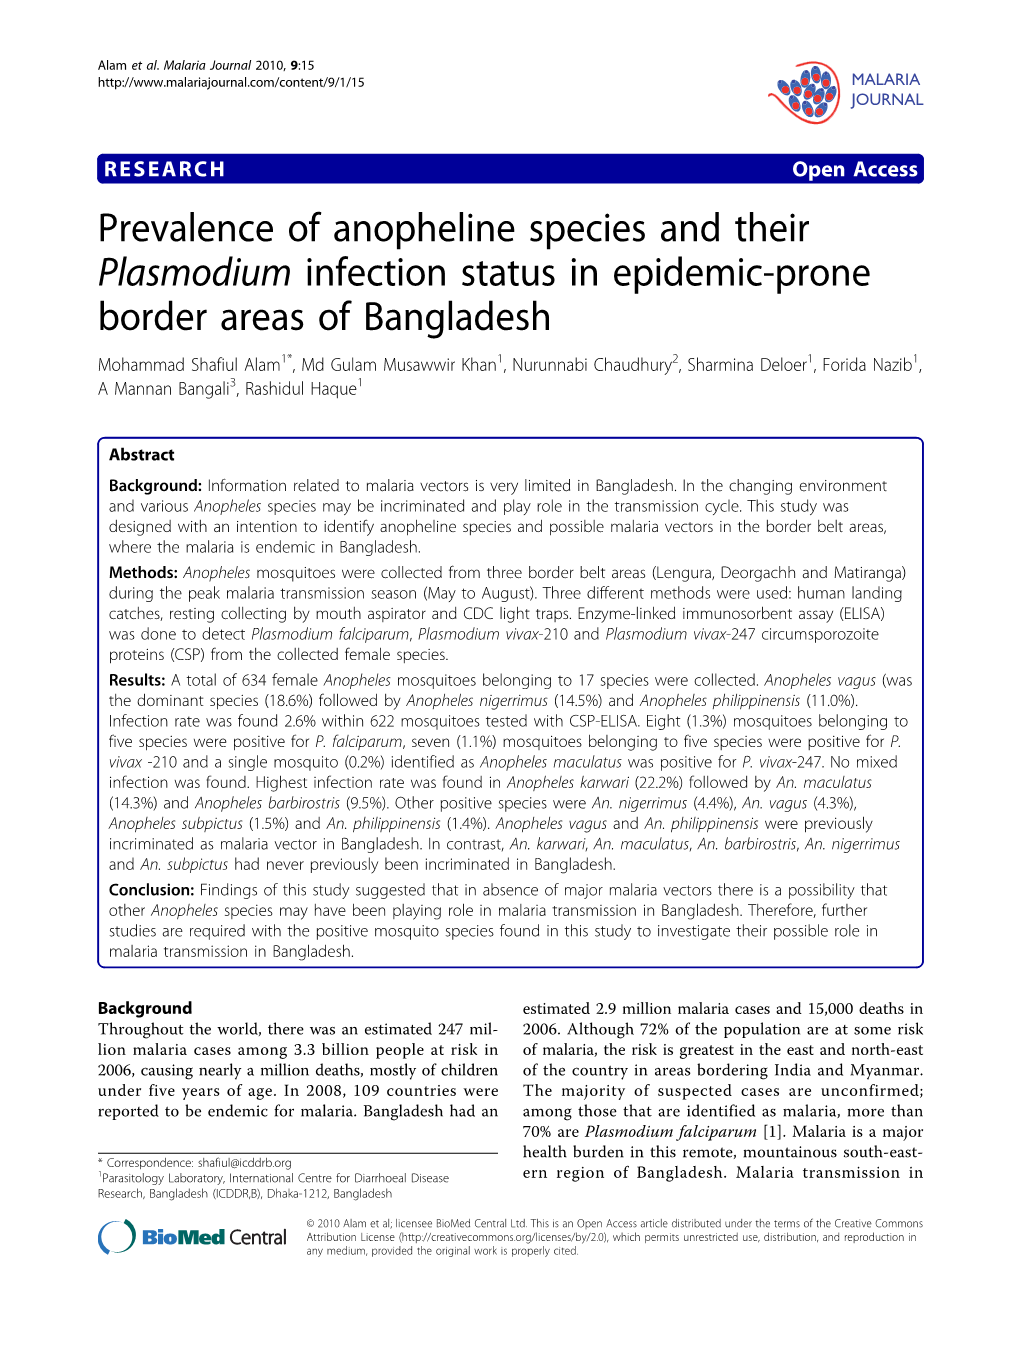 Prevalence of Anopheline Species and Their Plasmodium Infection Status